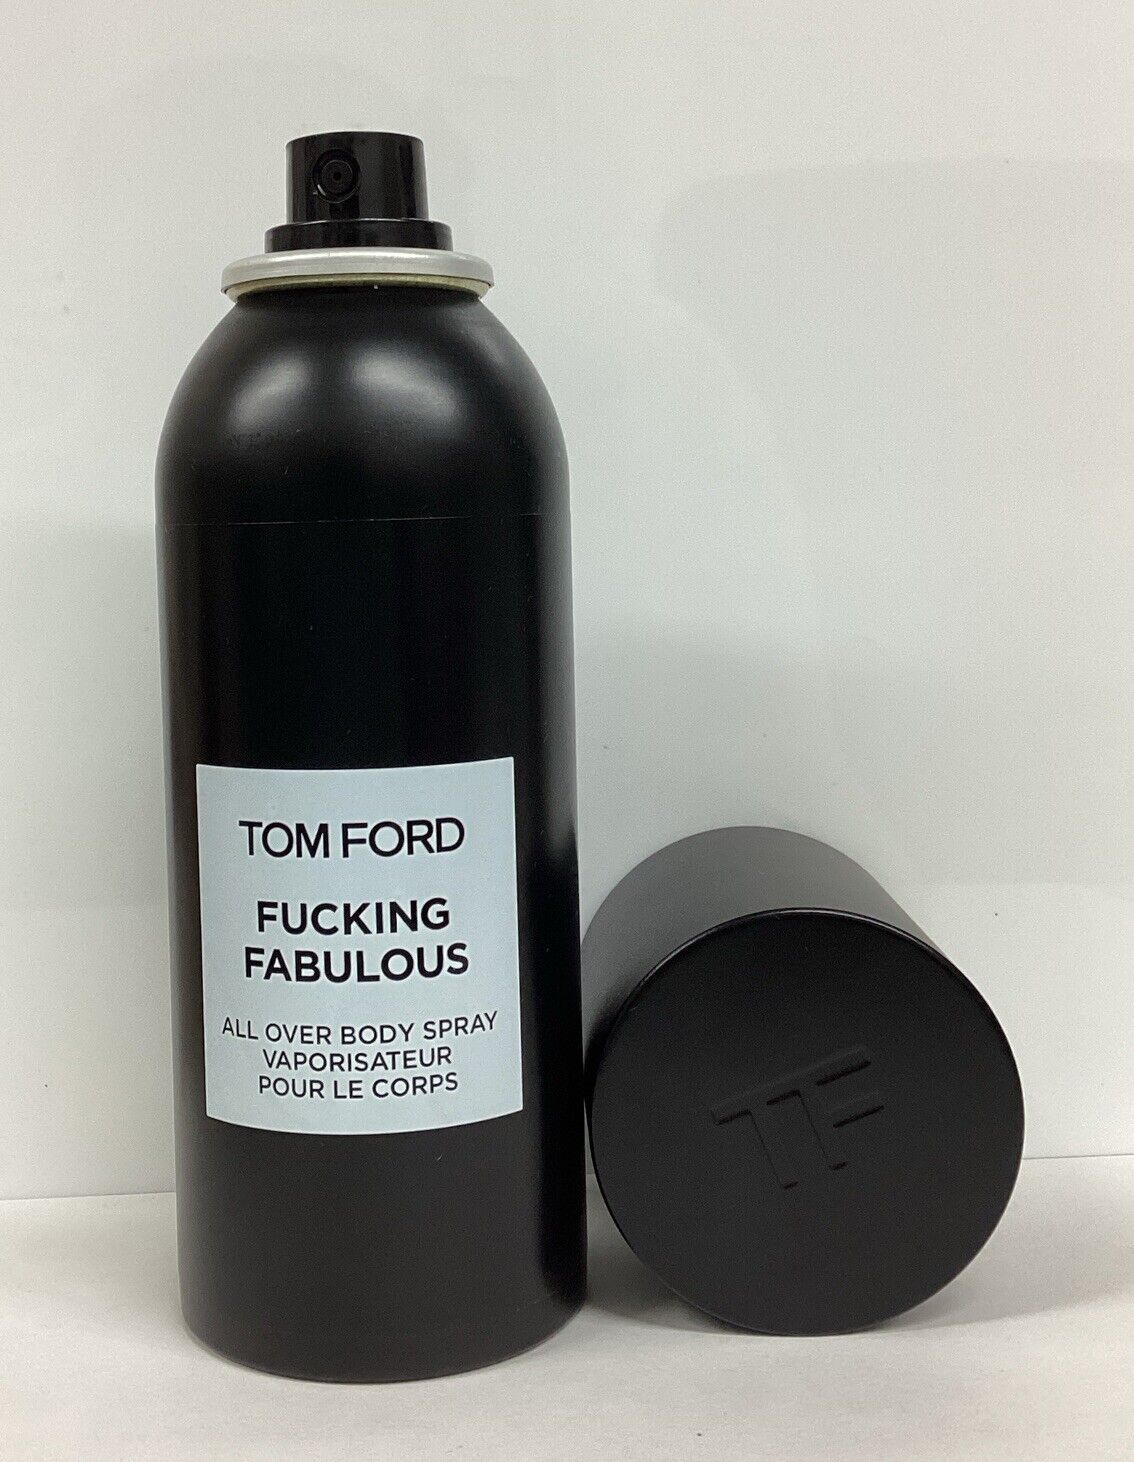 Tom Ford F*cking Fabulous All Over Body Spray 4oz As Pict, No Box